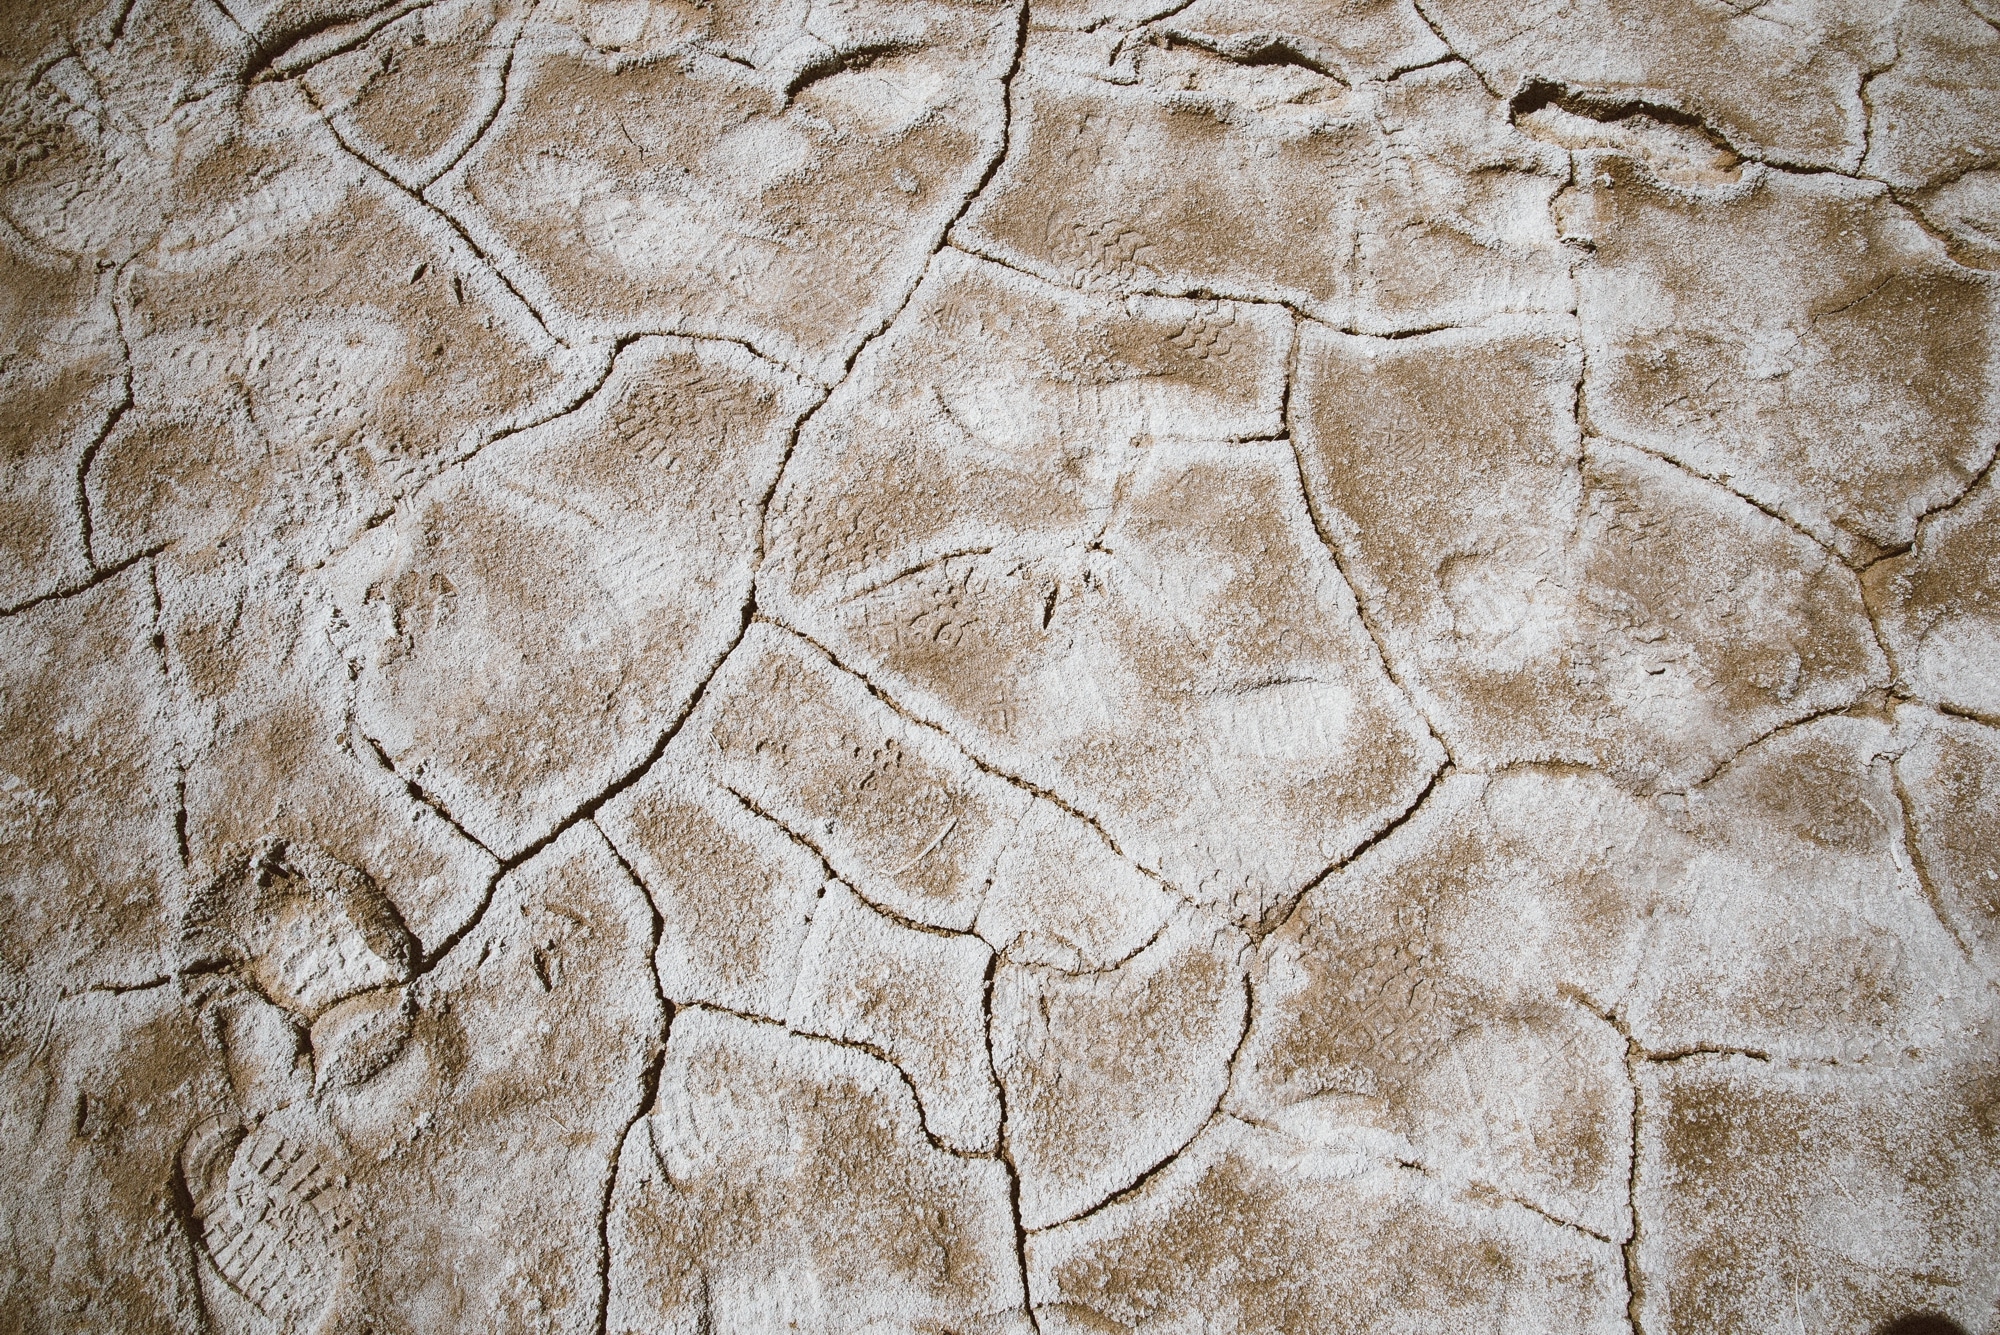 Footprints on cracked earth